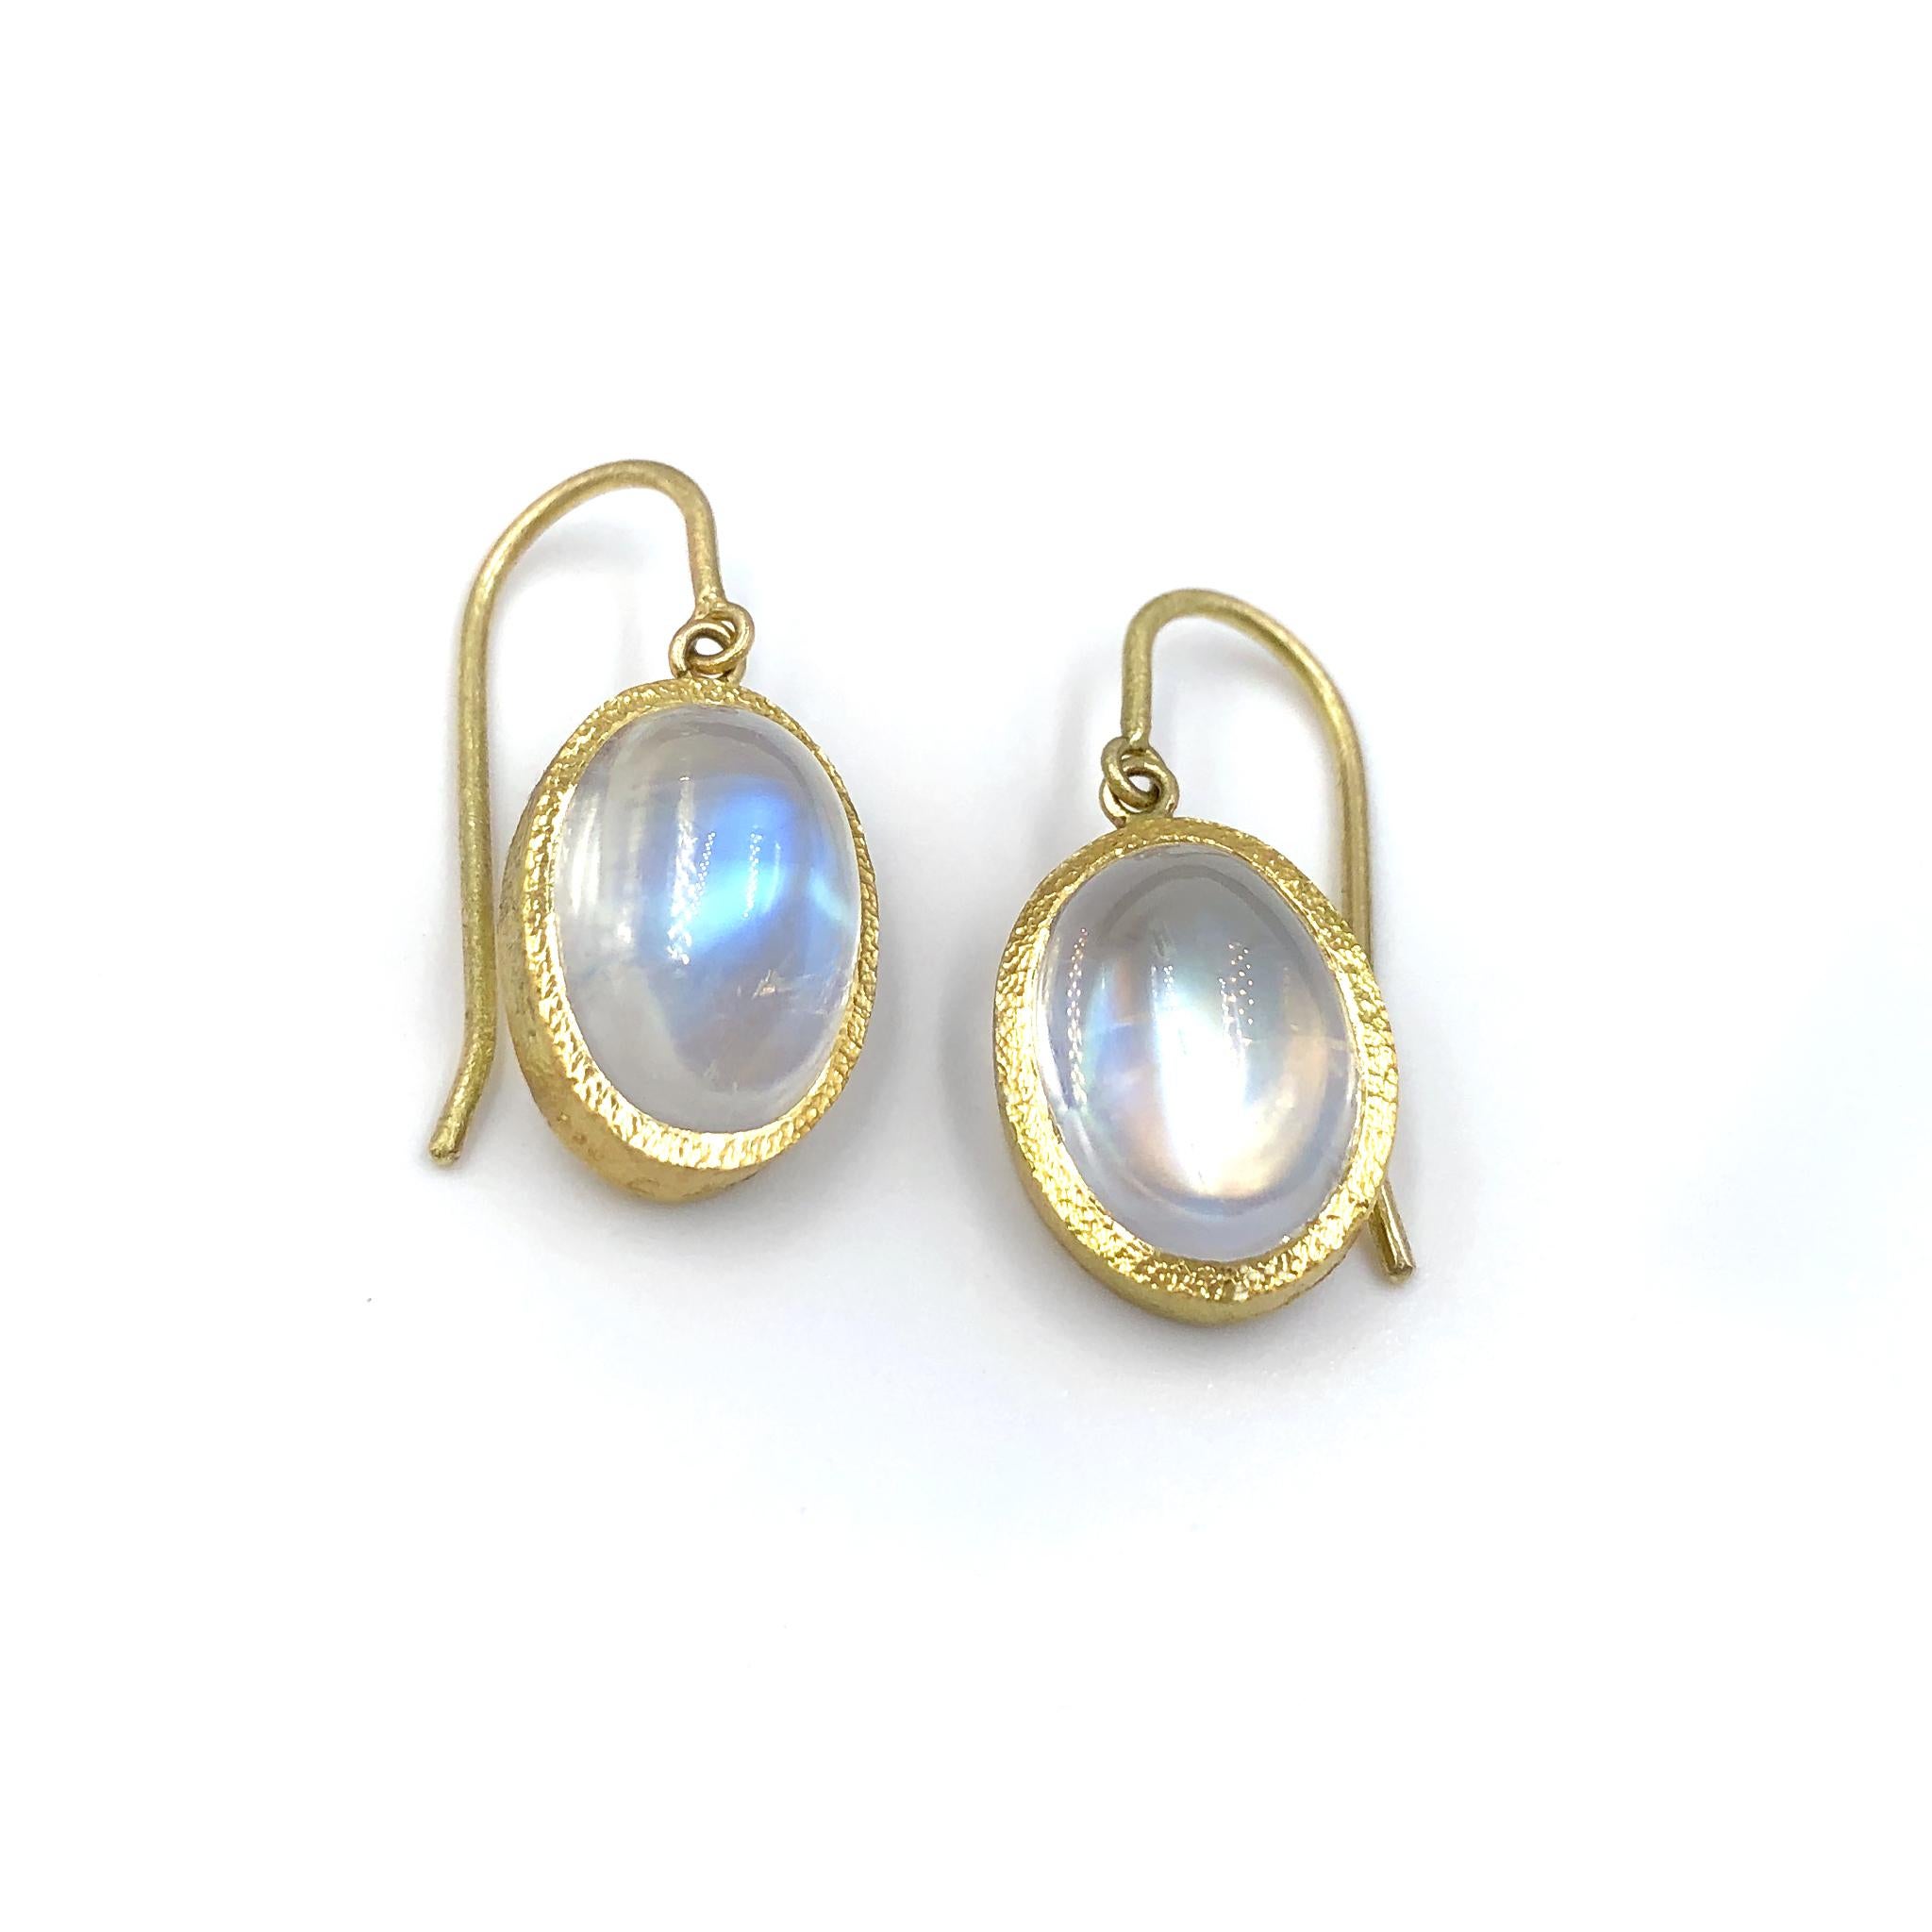 One of a Kind Earrings handcrafted by jewelry maker Devta Doolan in signature-finished 22k yellow gold showcasing a gorgeous matched pair of glowing rainbow moonstones, primarily exhibiting blue and green flash. Stamped 22k with the artist's